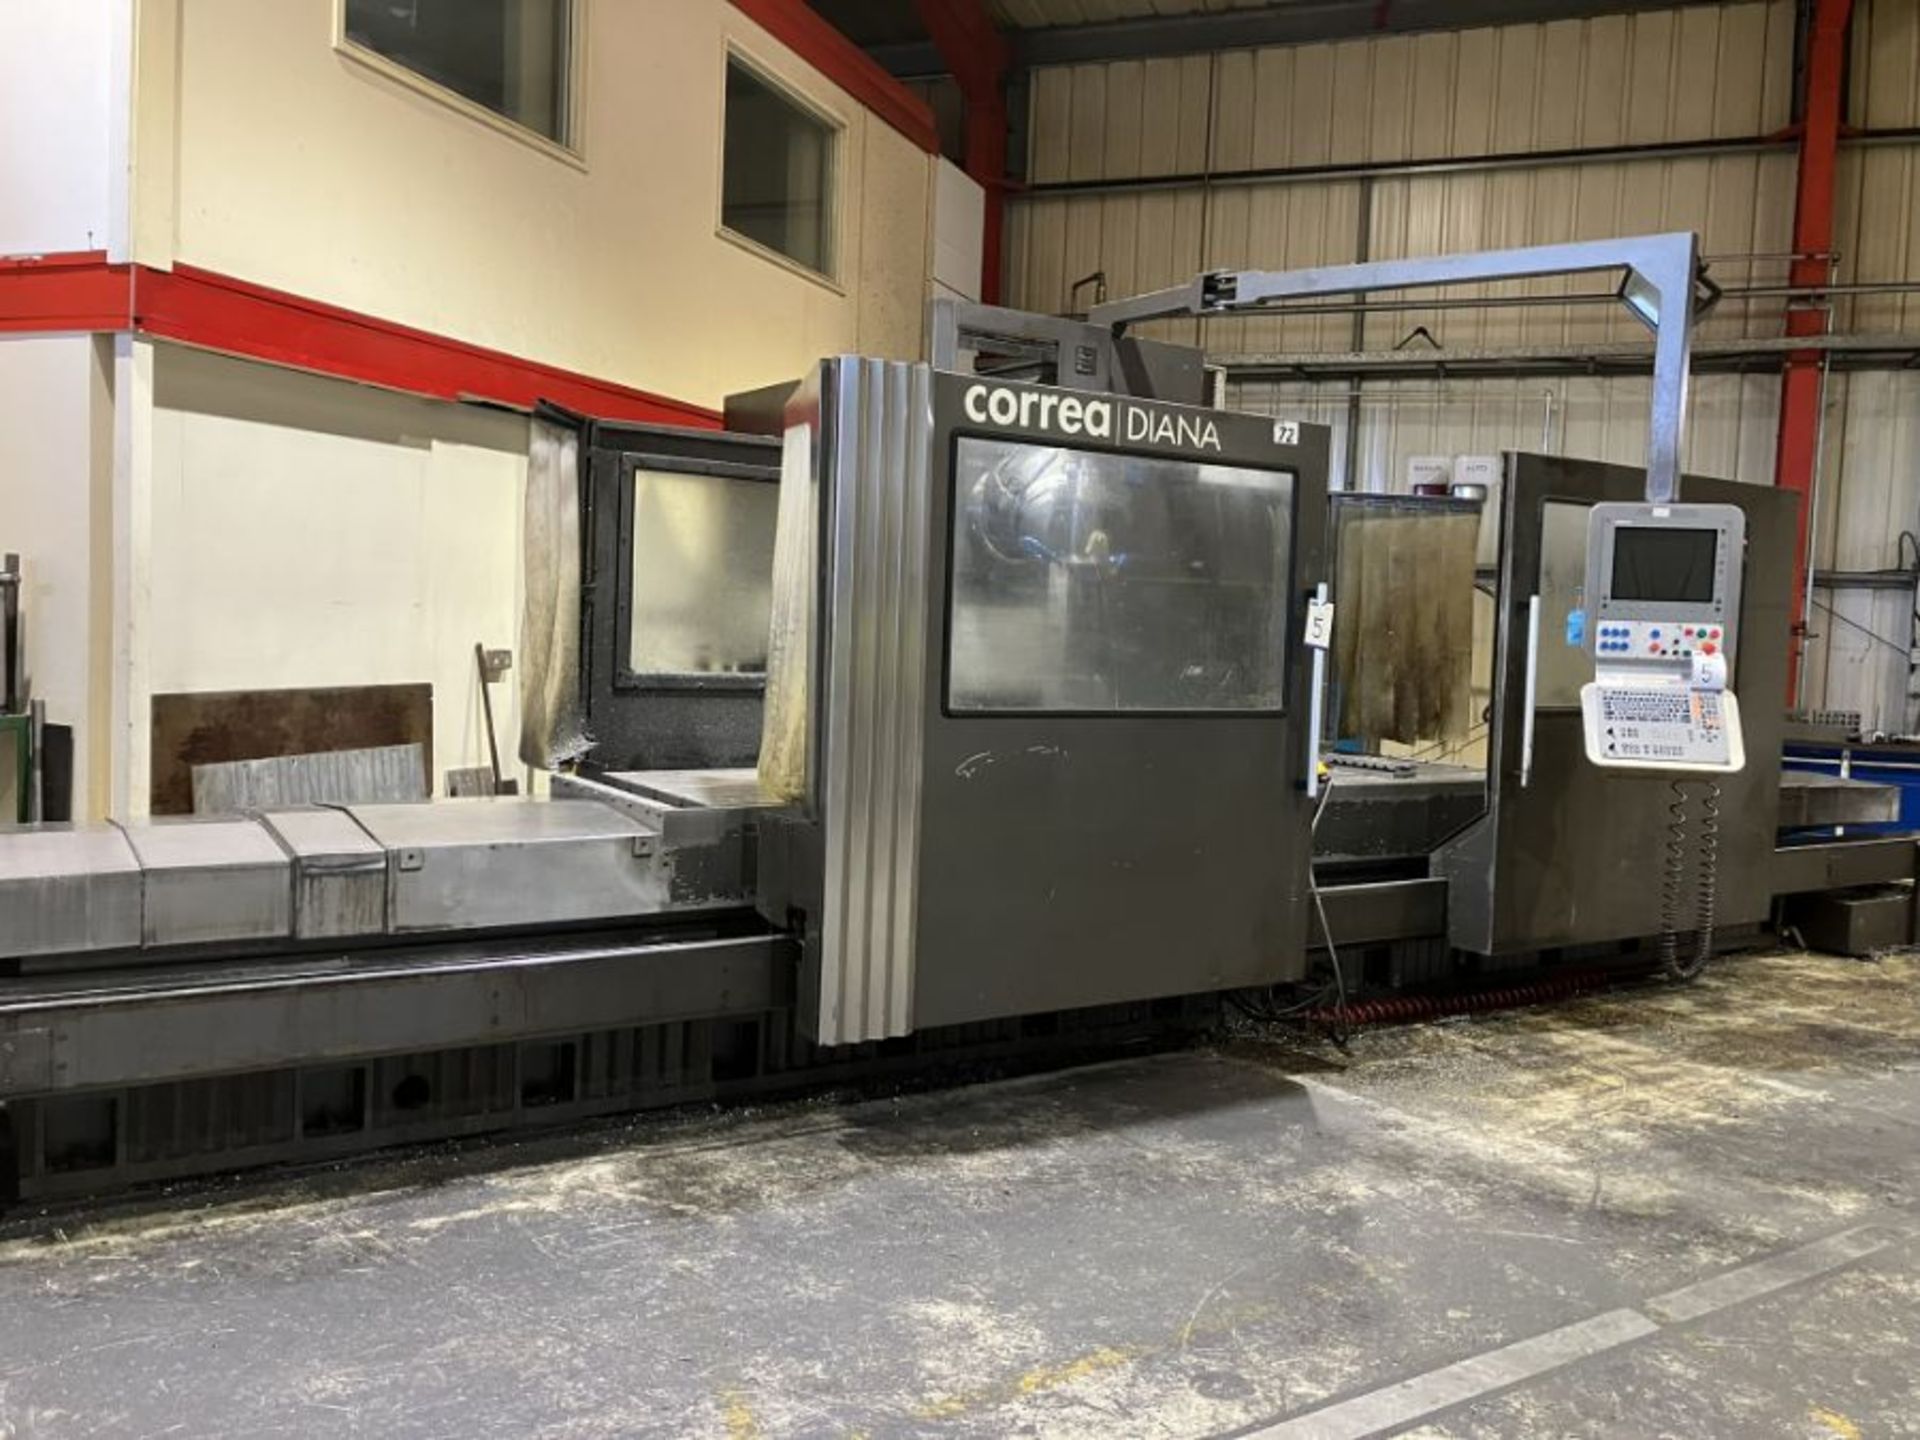 Correa model Diana 35 CNC bed mill, 5 axis (3 plus 2) (2007) - Image 2 of 17